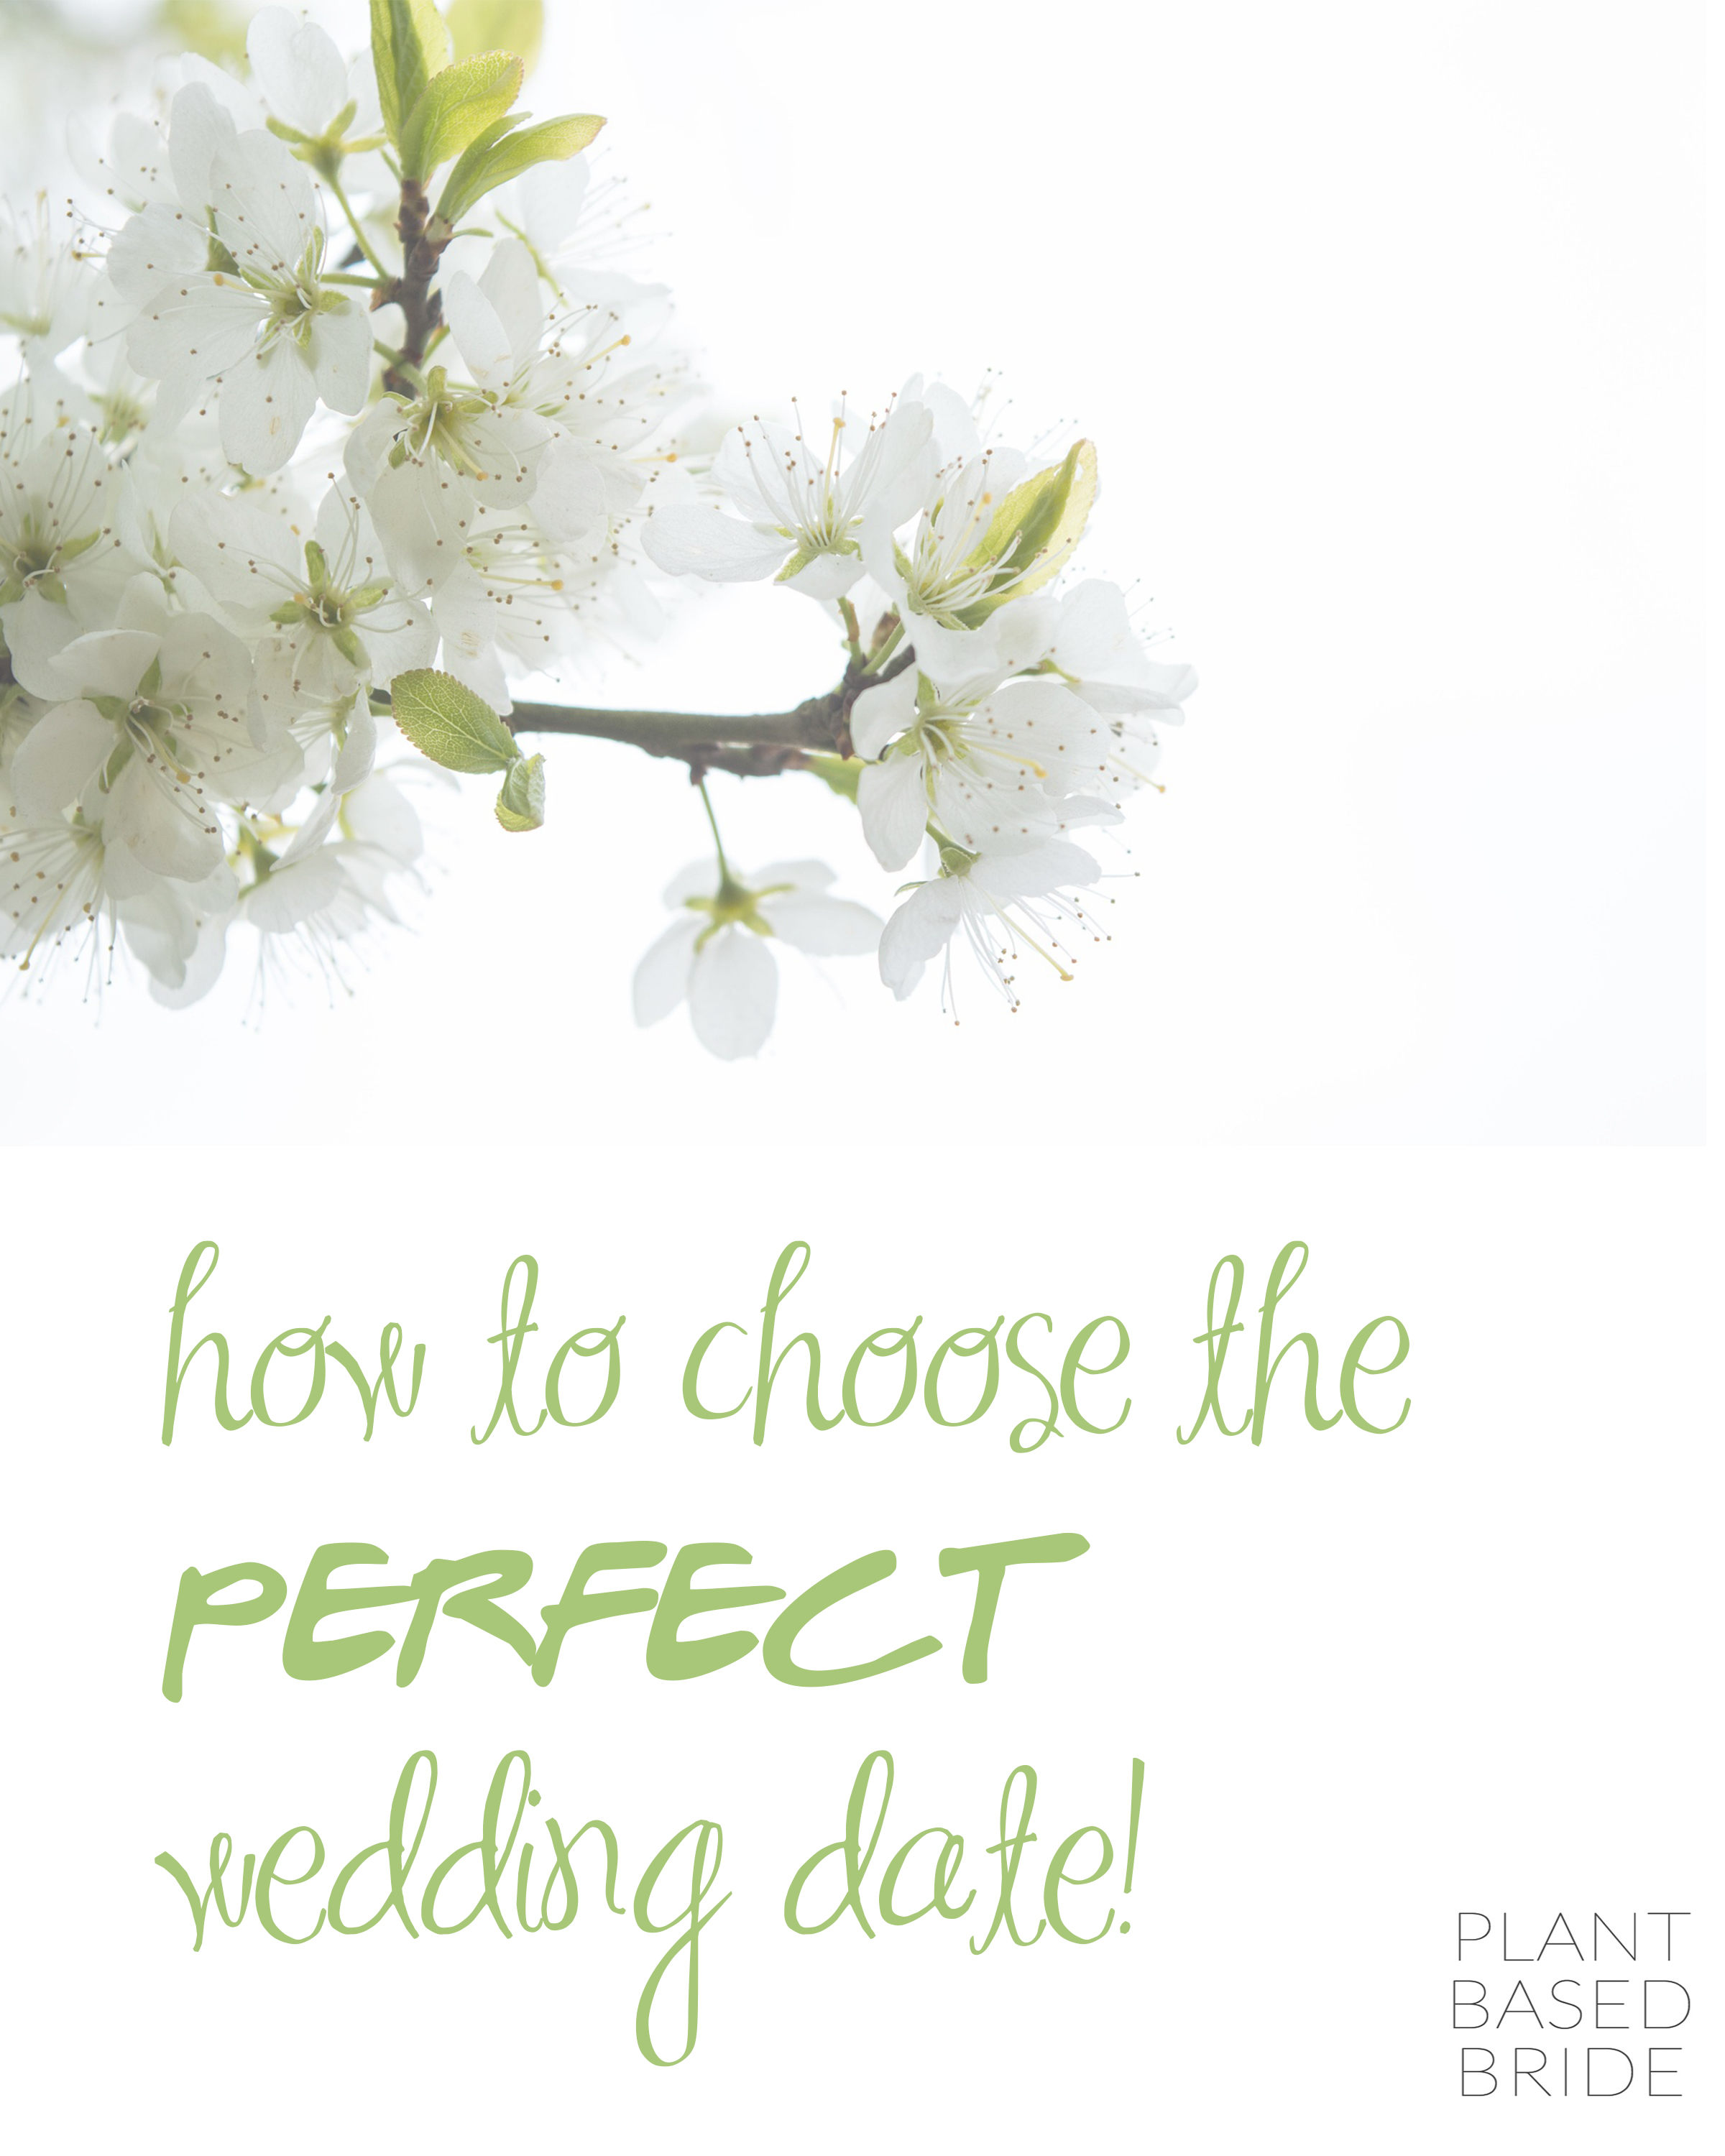 5 Steps for Choosing Your Wedding Date